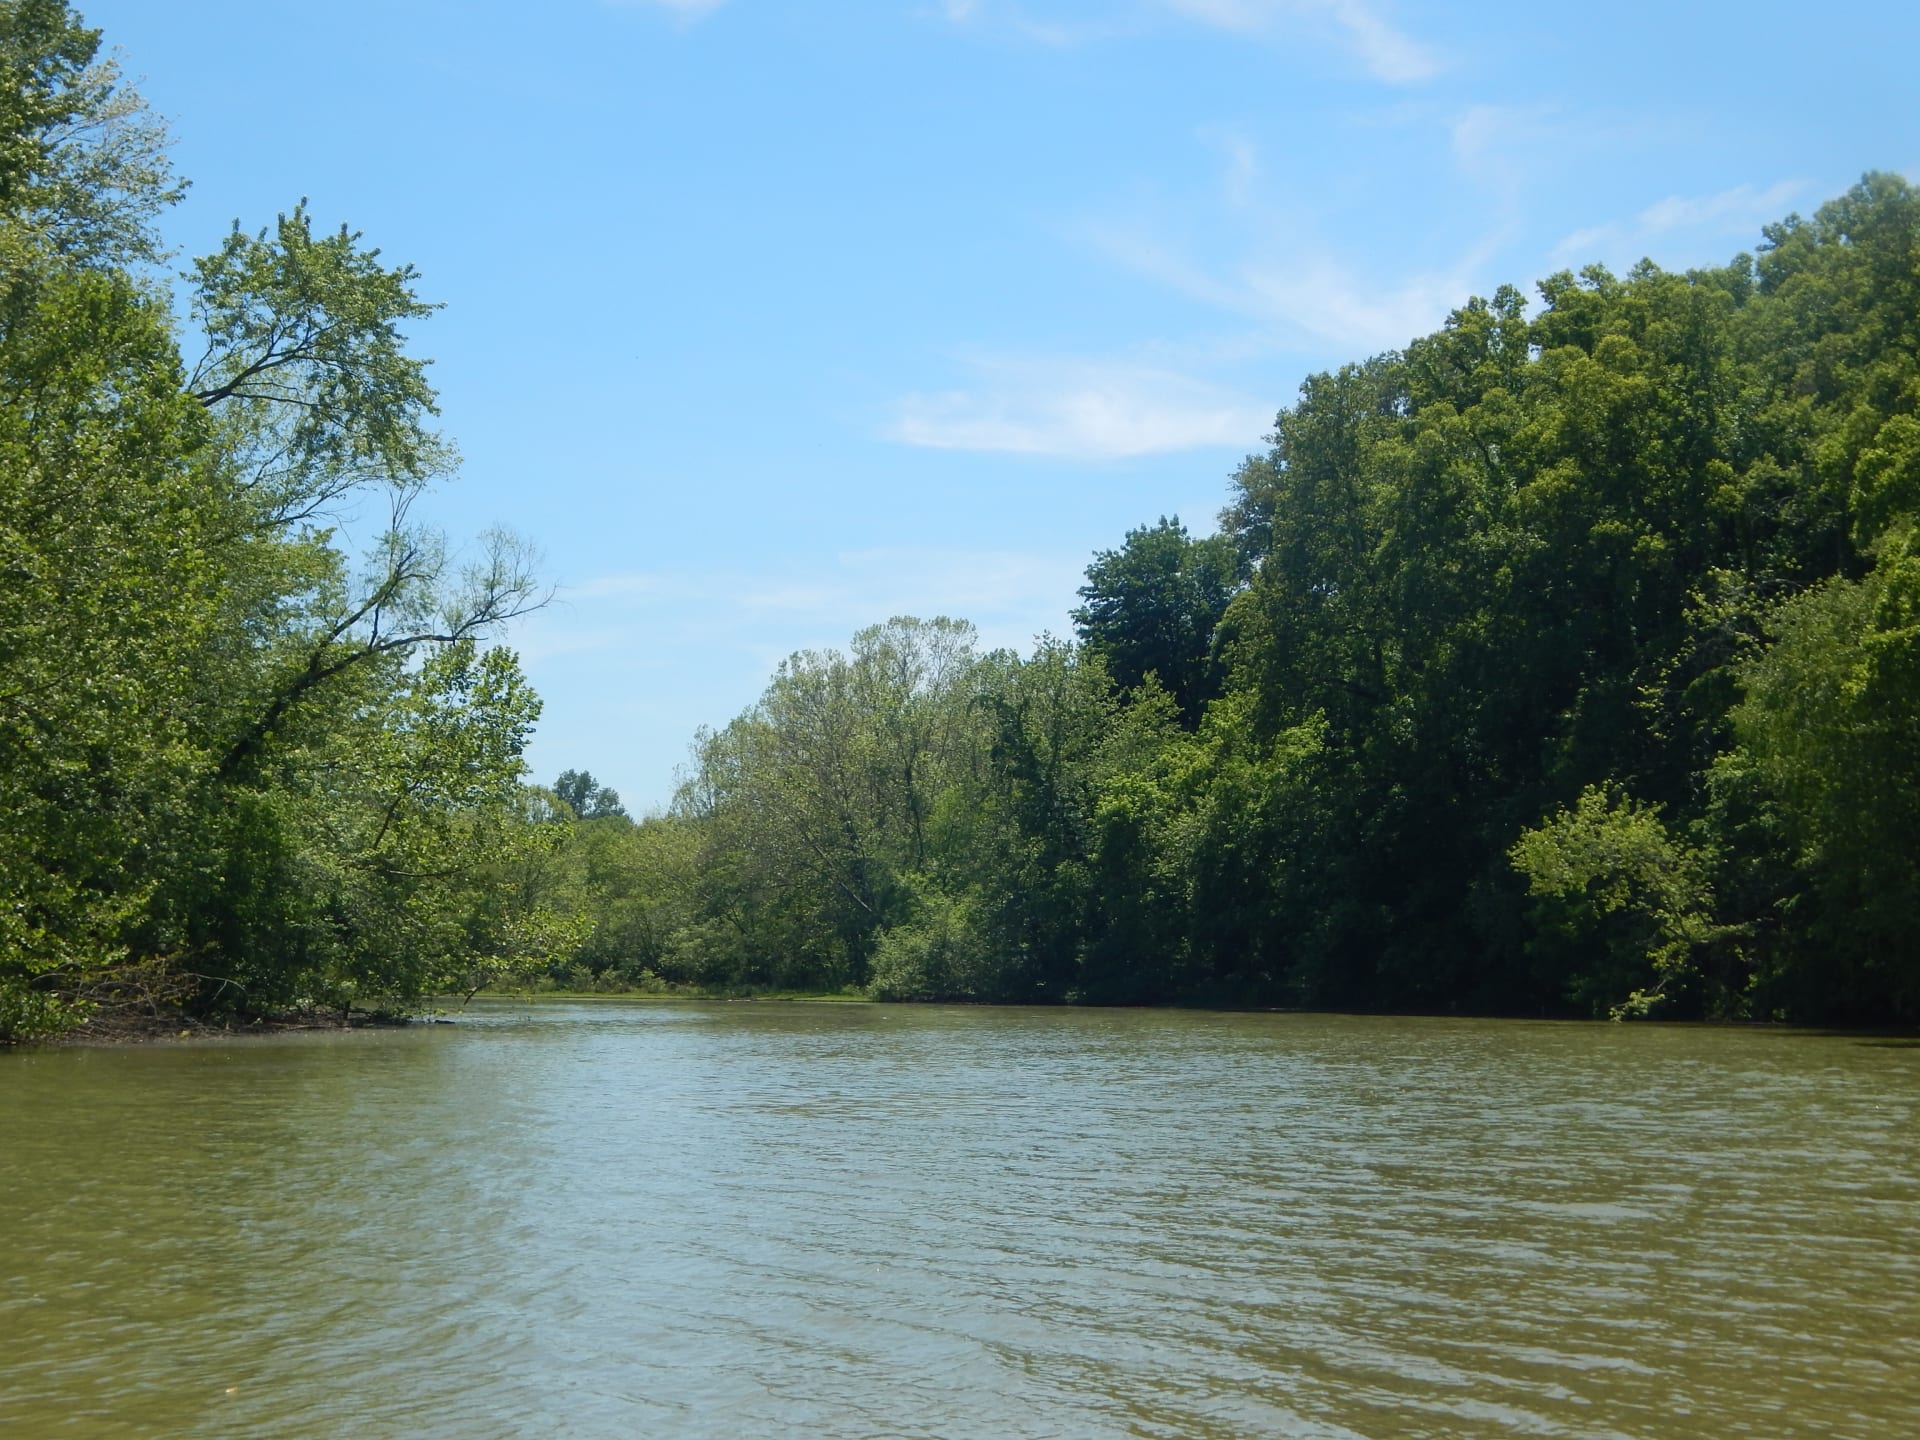 Single island completely surrounded by the Little Sandy River in Northeast Kentucky